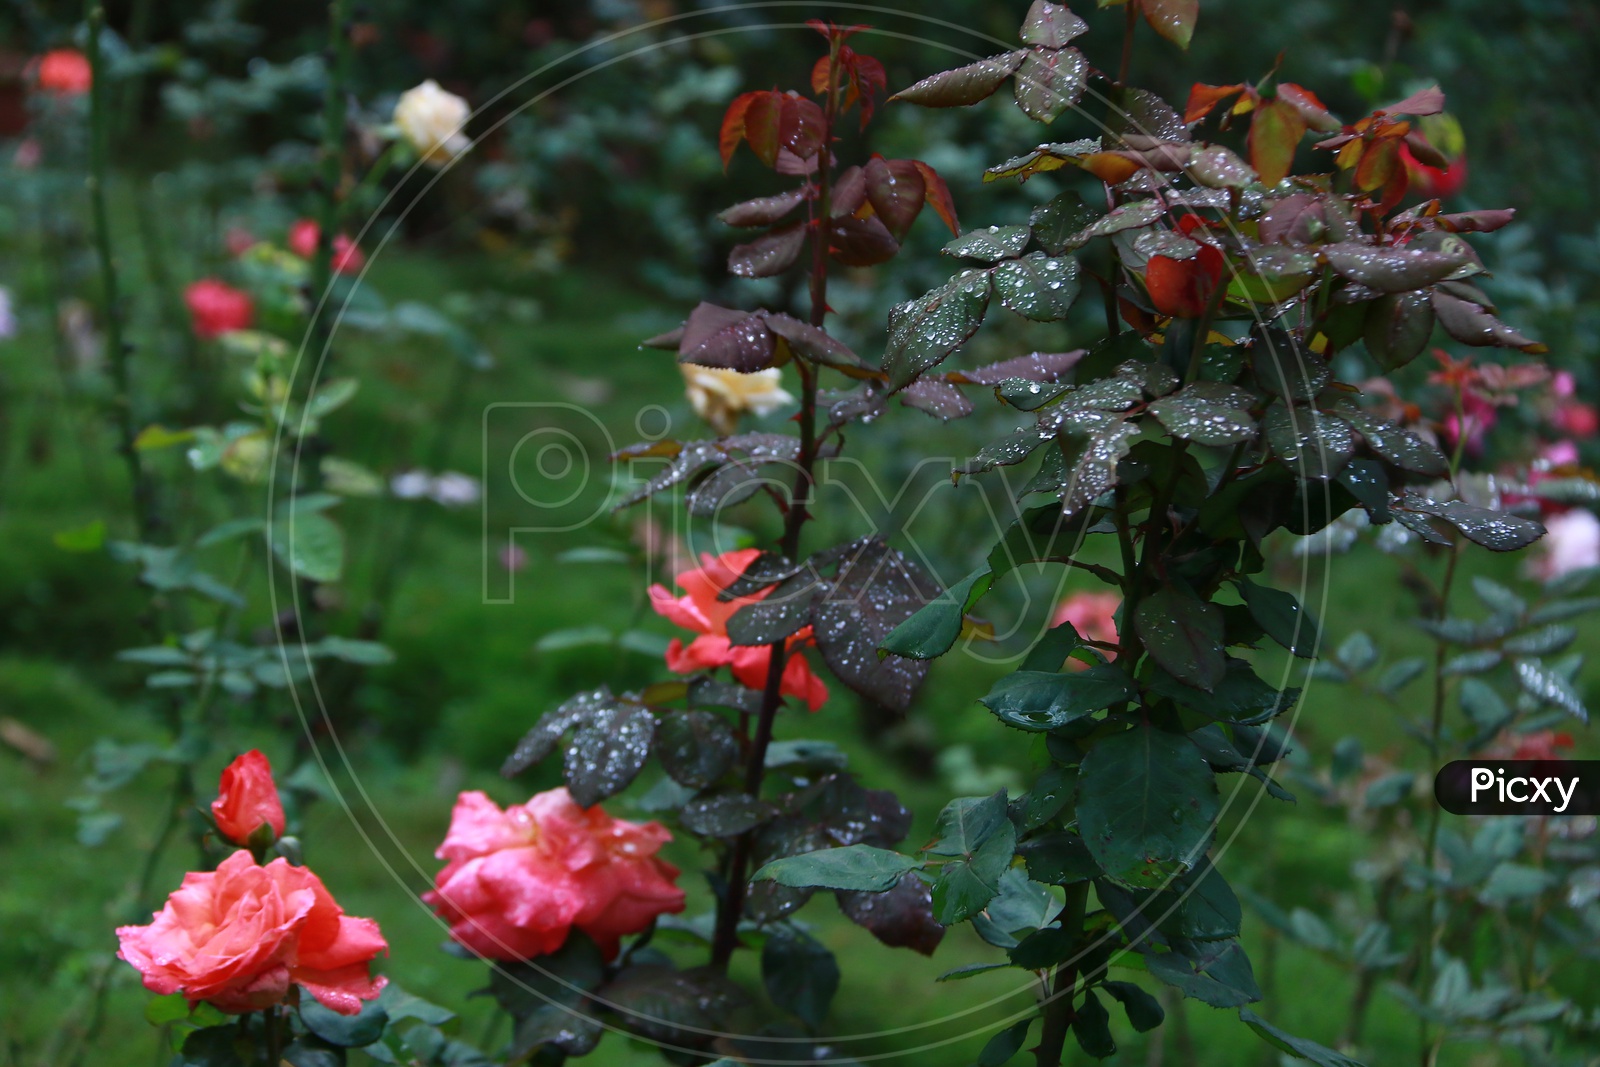 Dew on the Rose plants